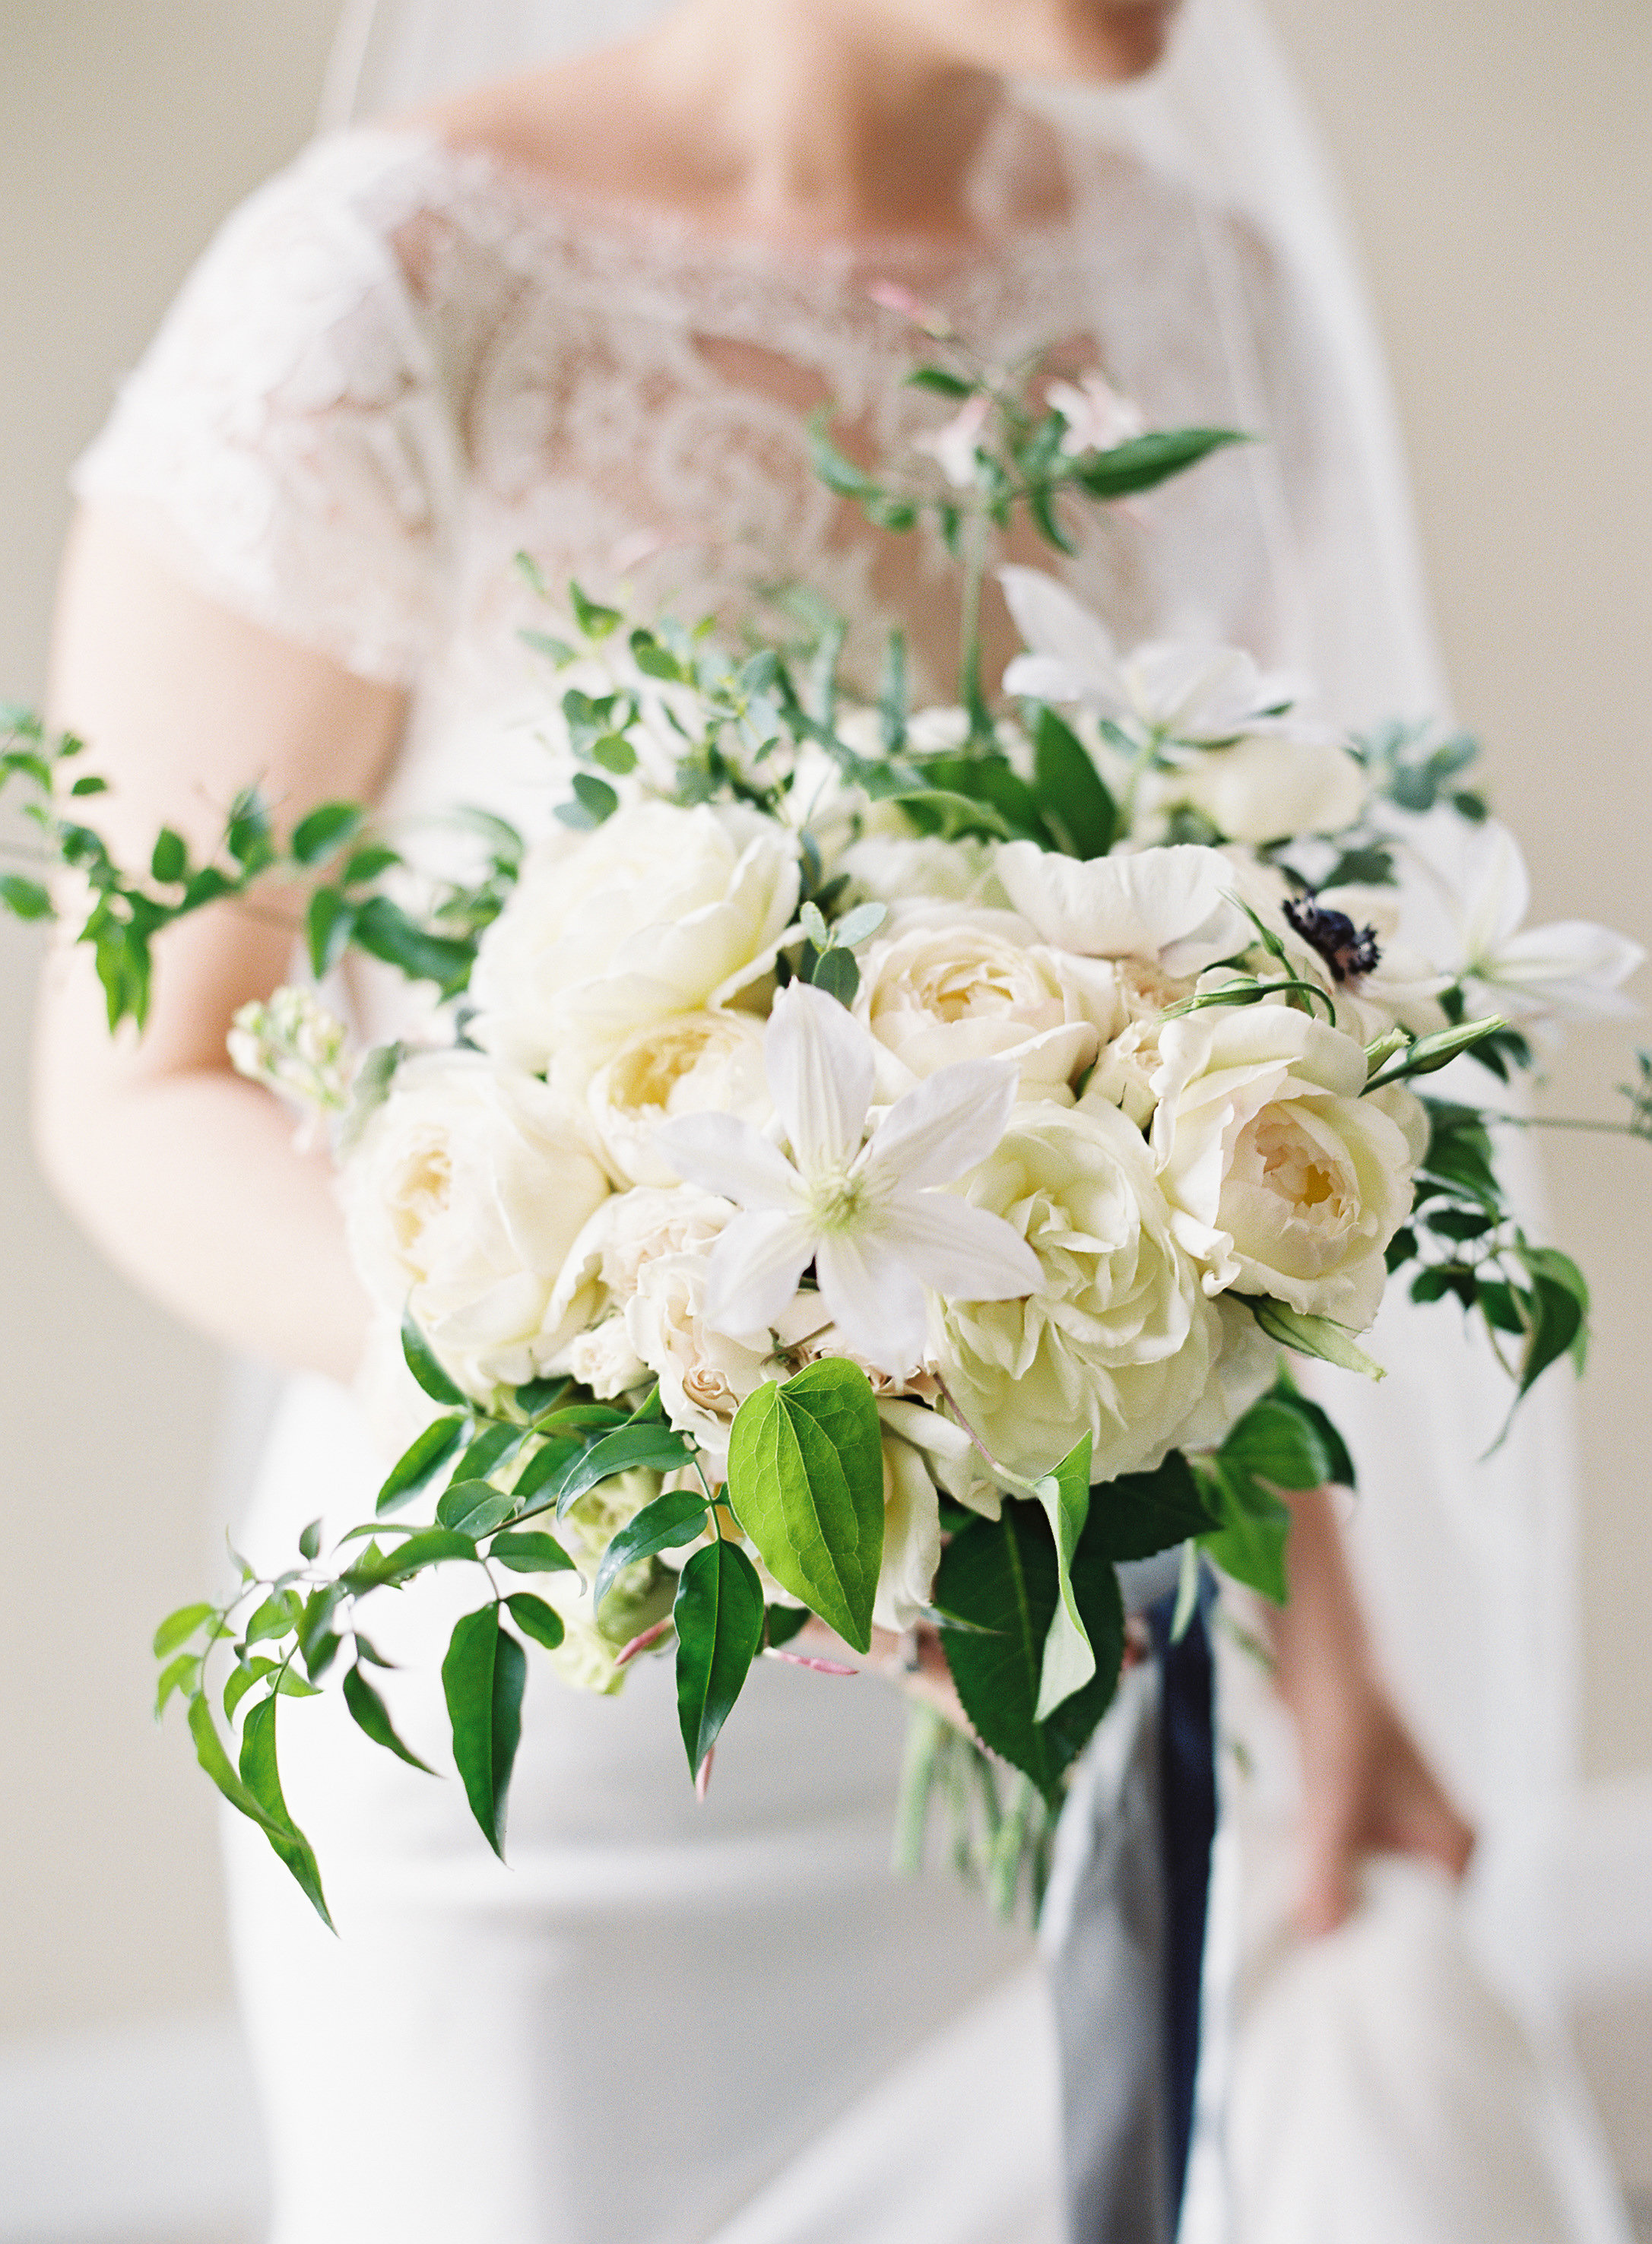 Classic White Bridal Bouquet | St. Joseph Michigan | The Day's Design | Clary Pfieffer Photography